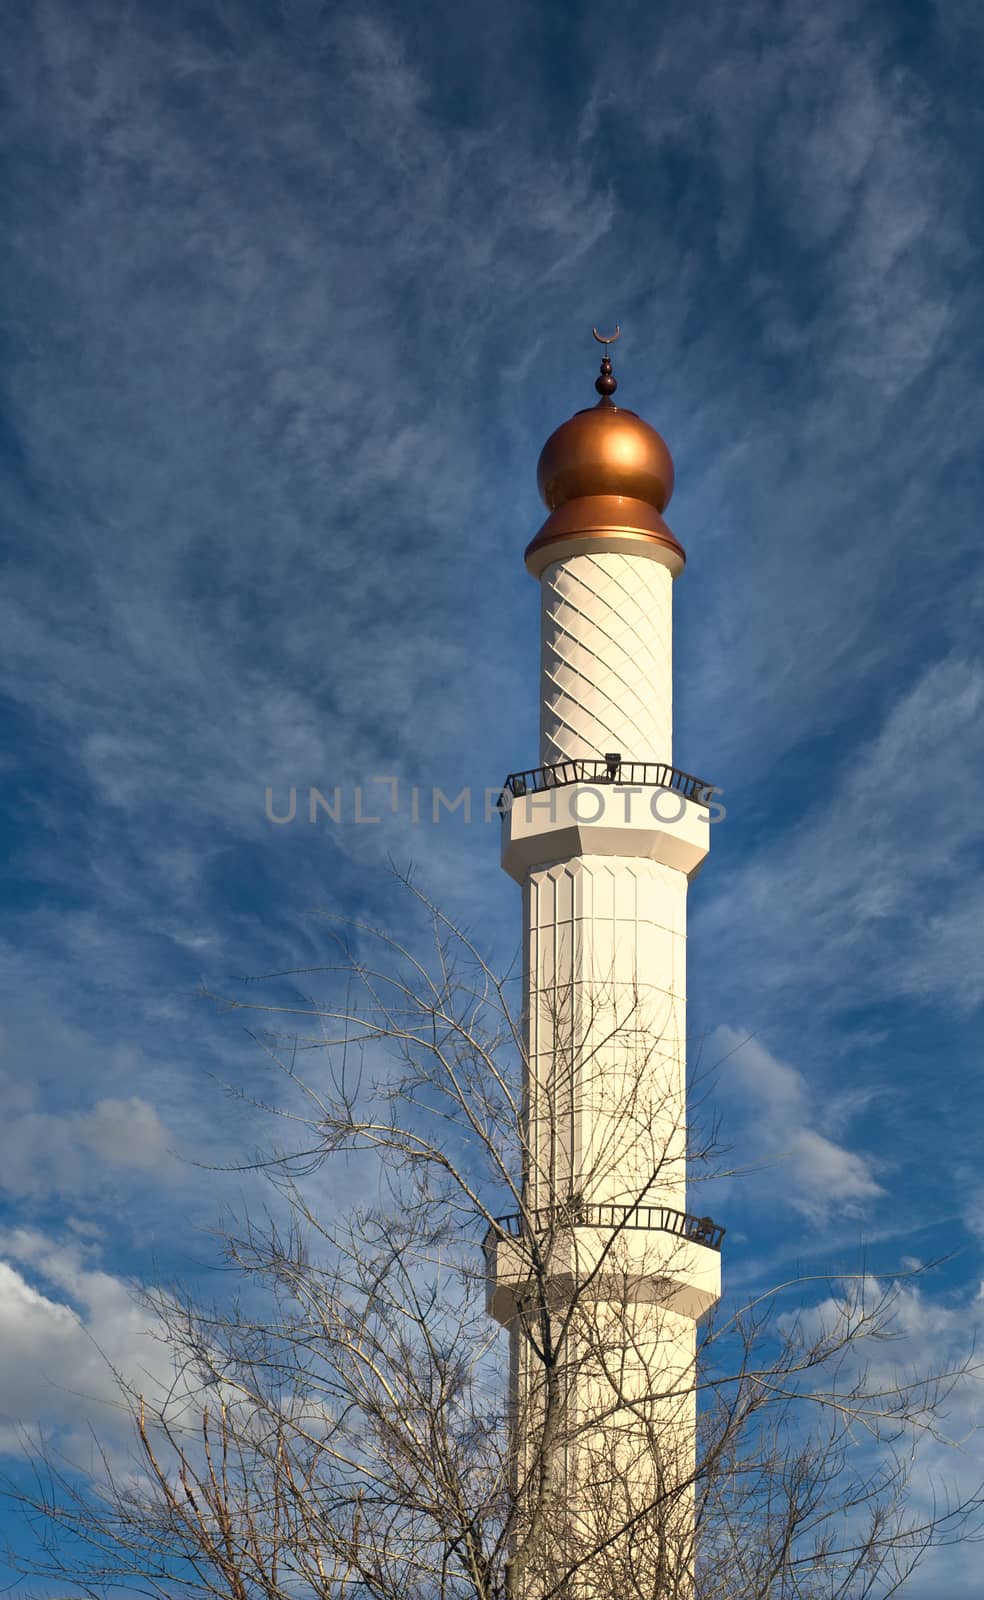 A beautiful tower rising from an Islamic Mosque into the blue sky behind trees in winter